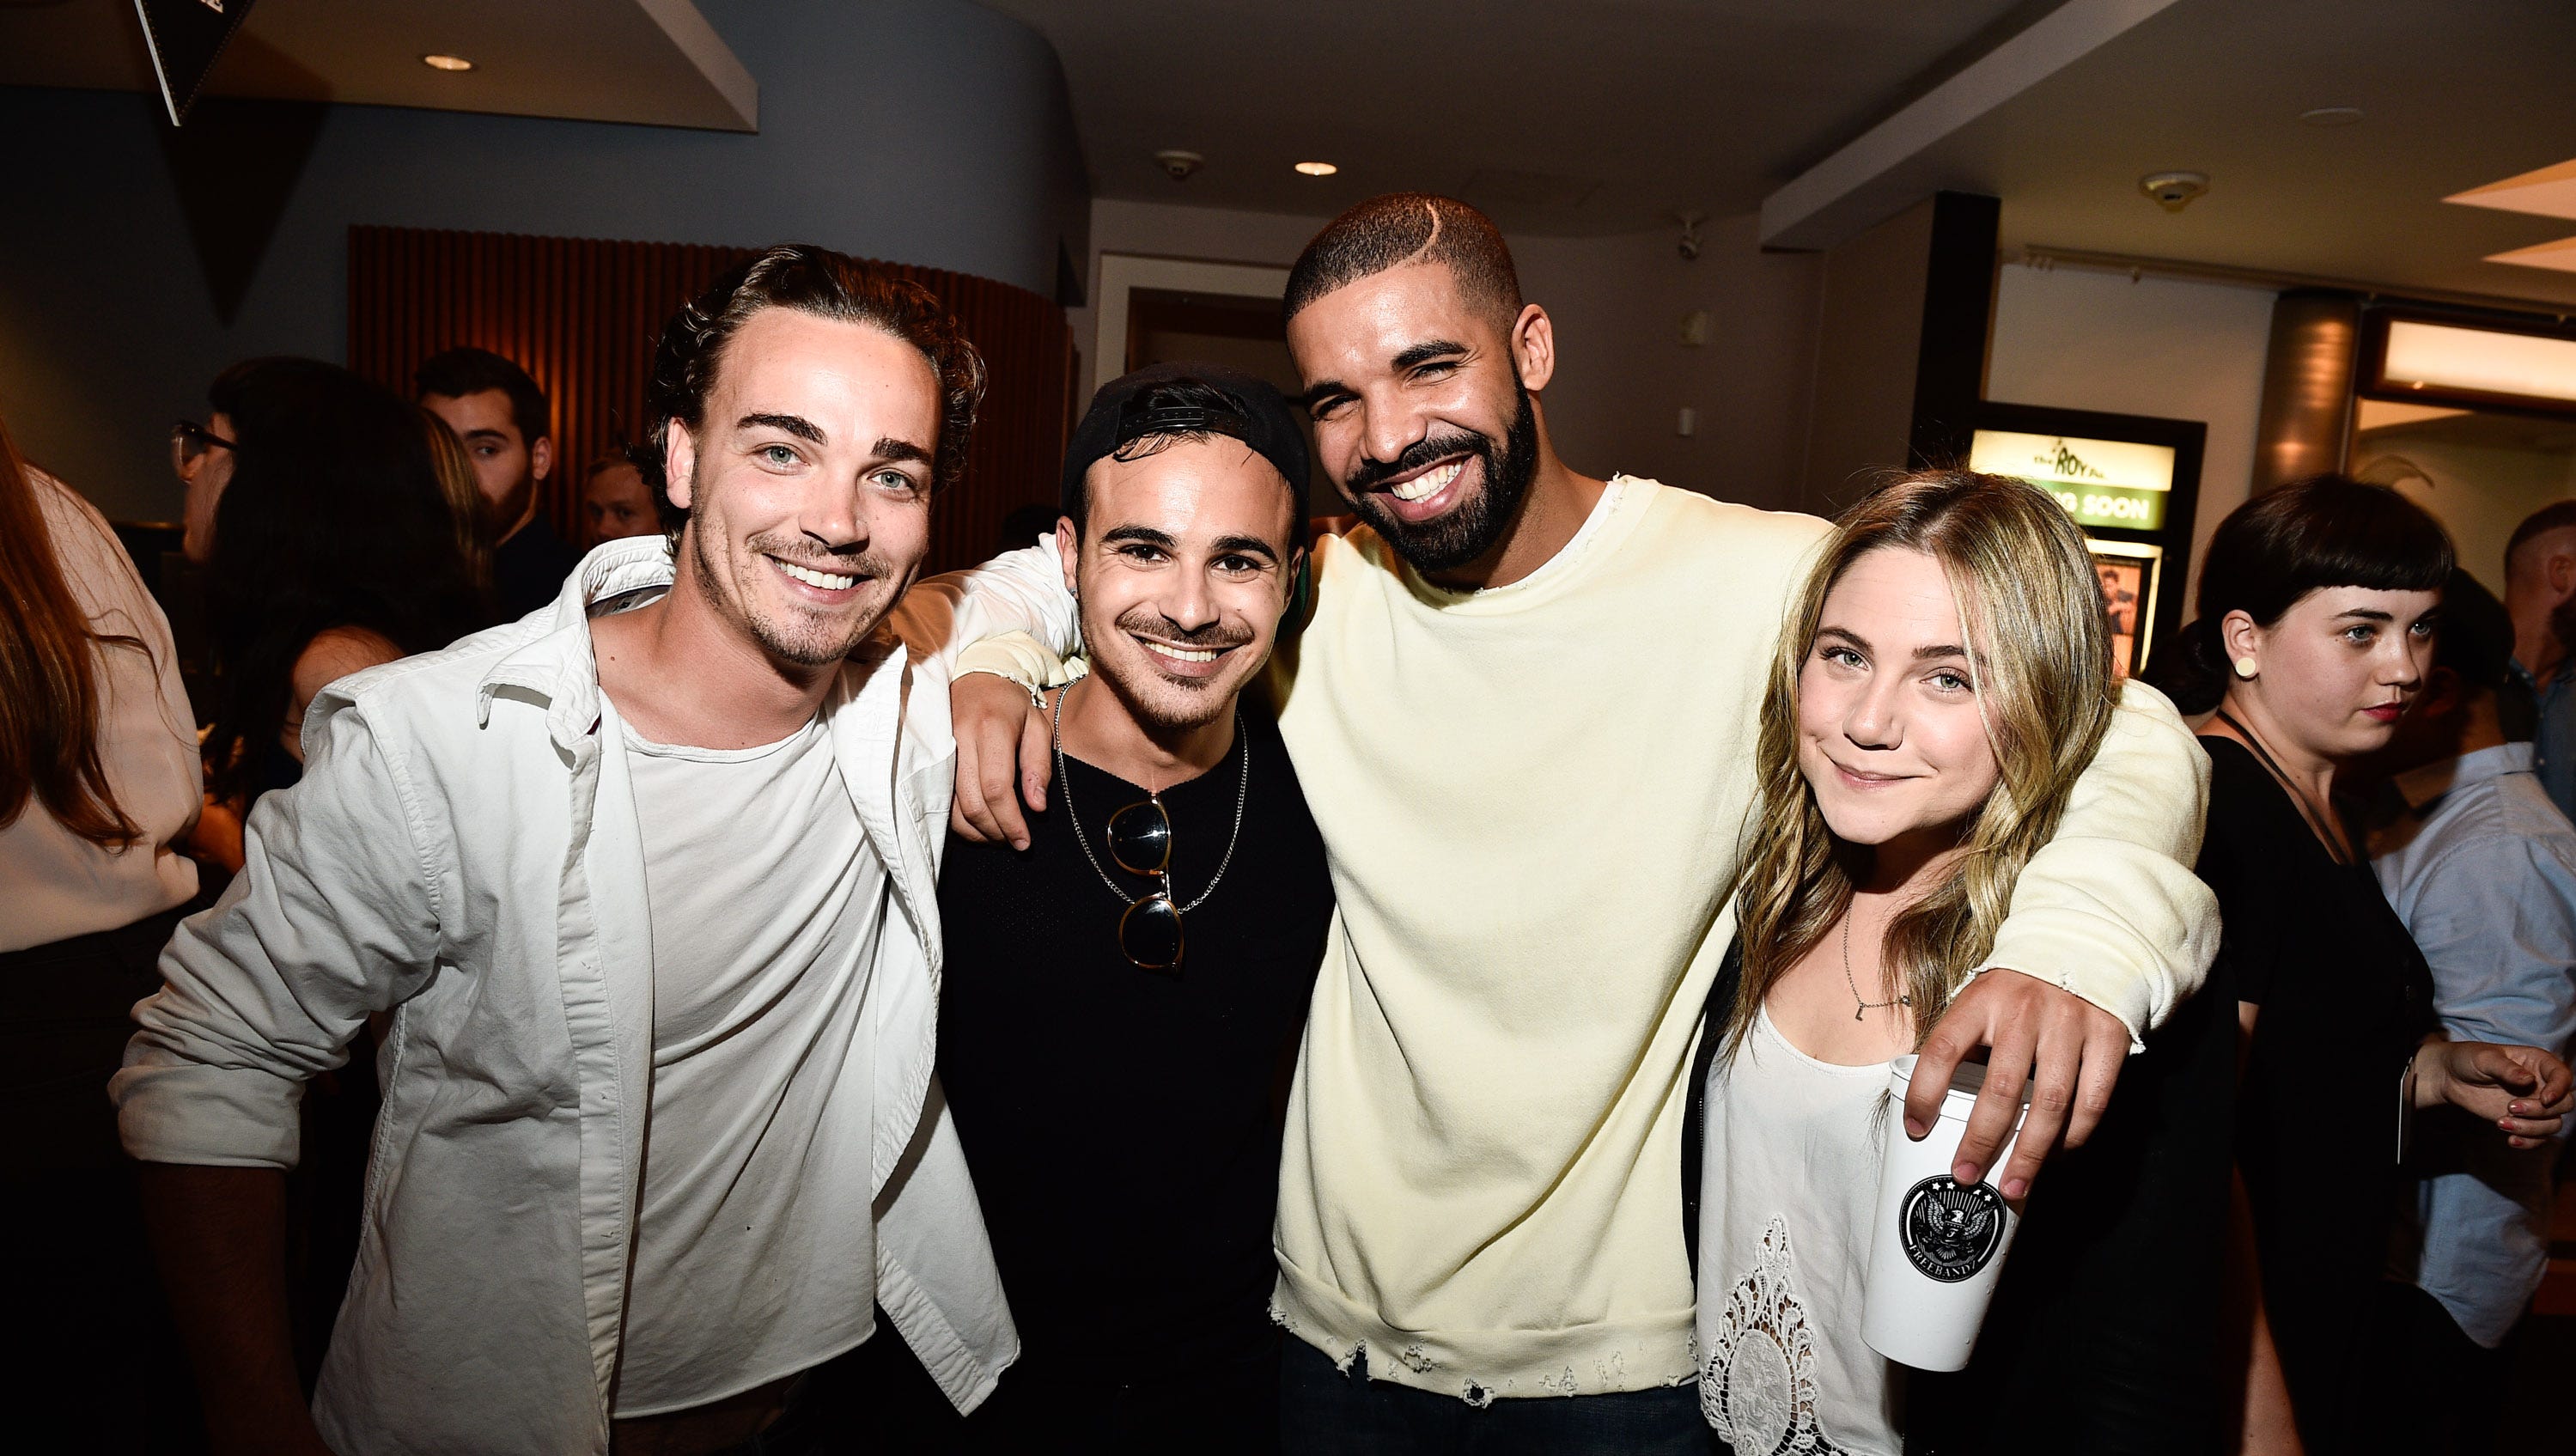 Everyone's back the 'Degrassi' reunion trailer, except